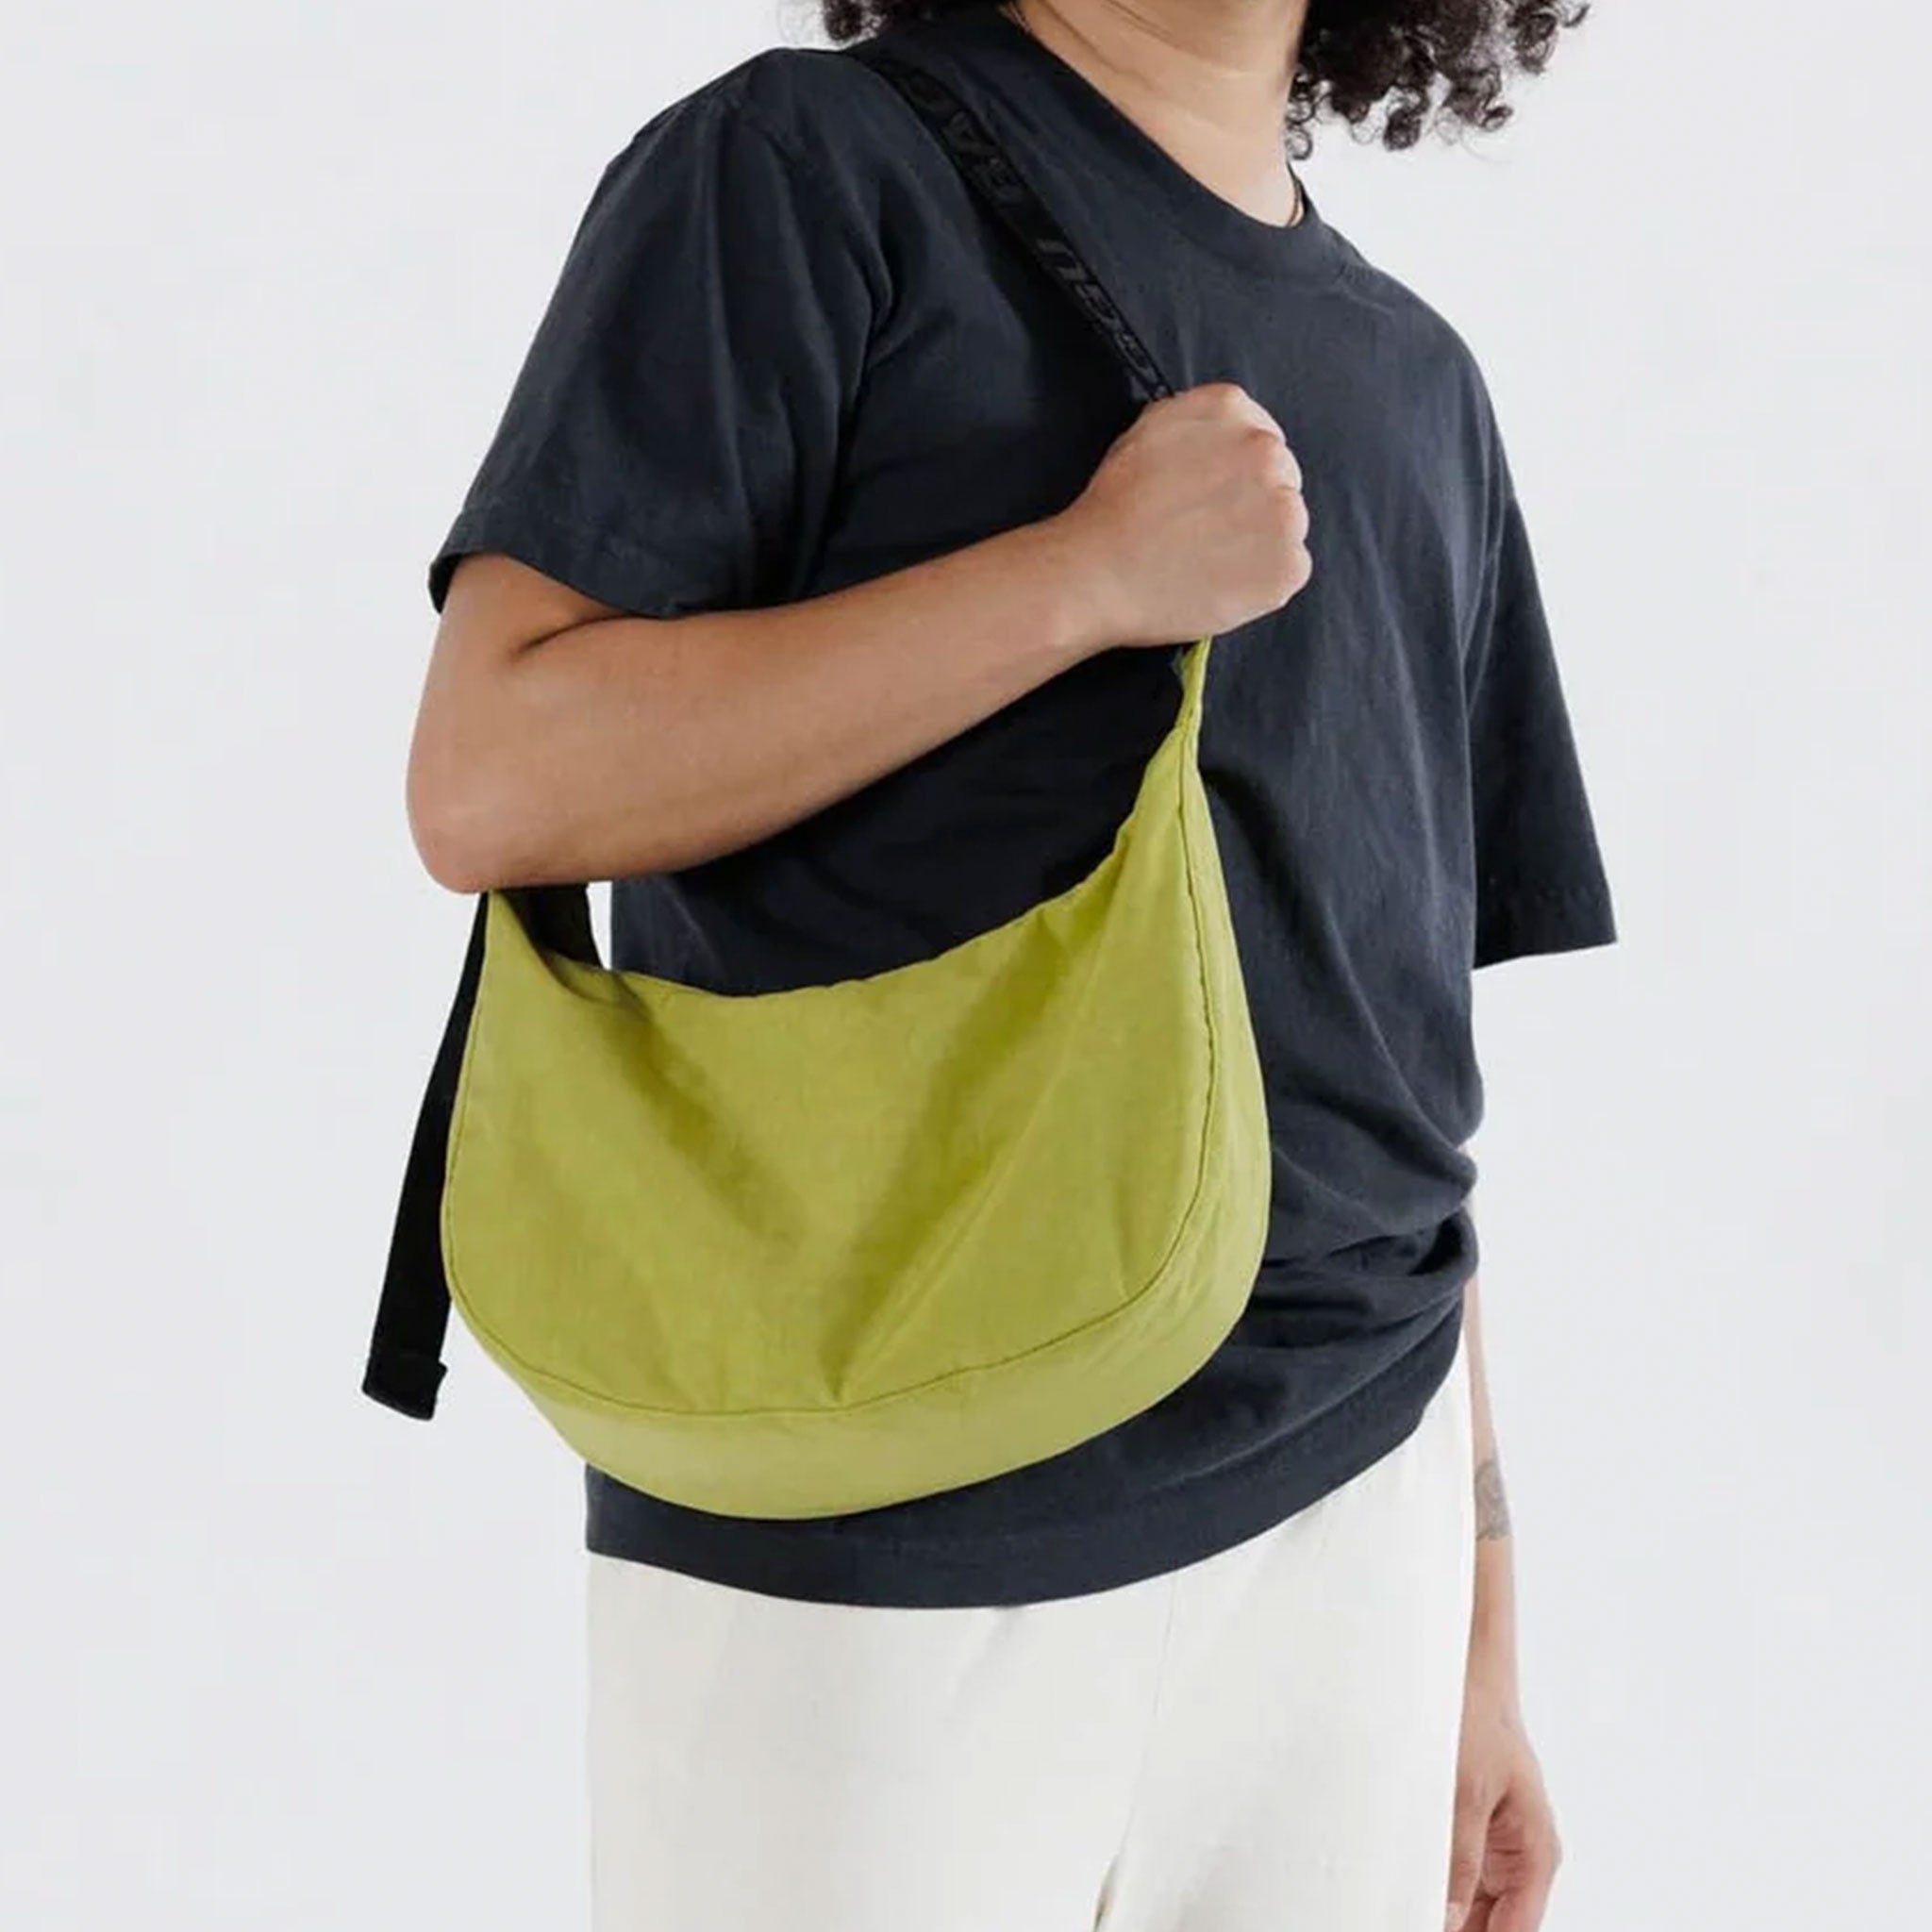 A model wearing a A crescent shaped bag in a lime green color with a black strap.